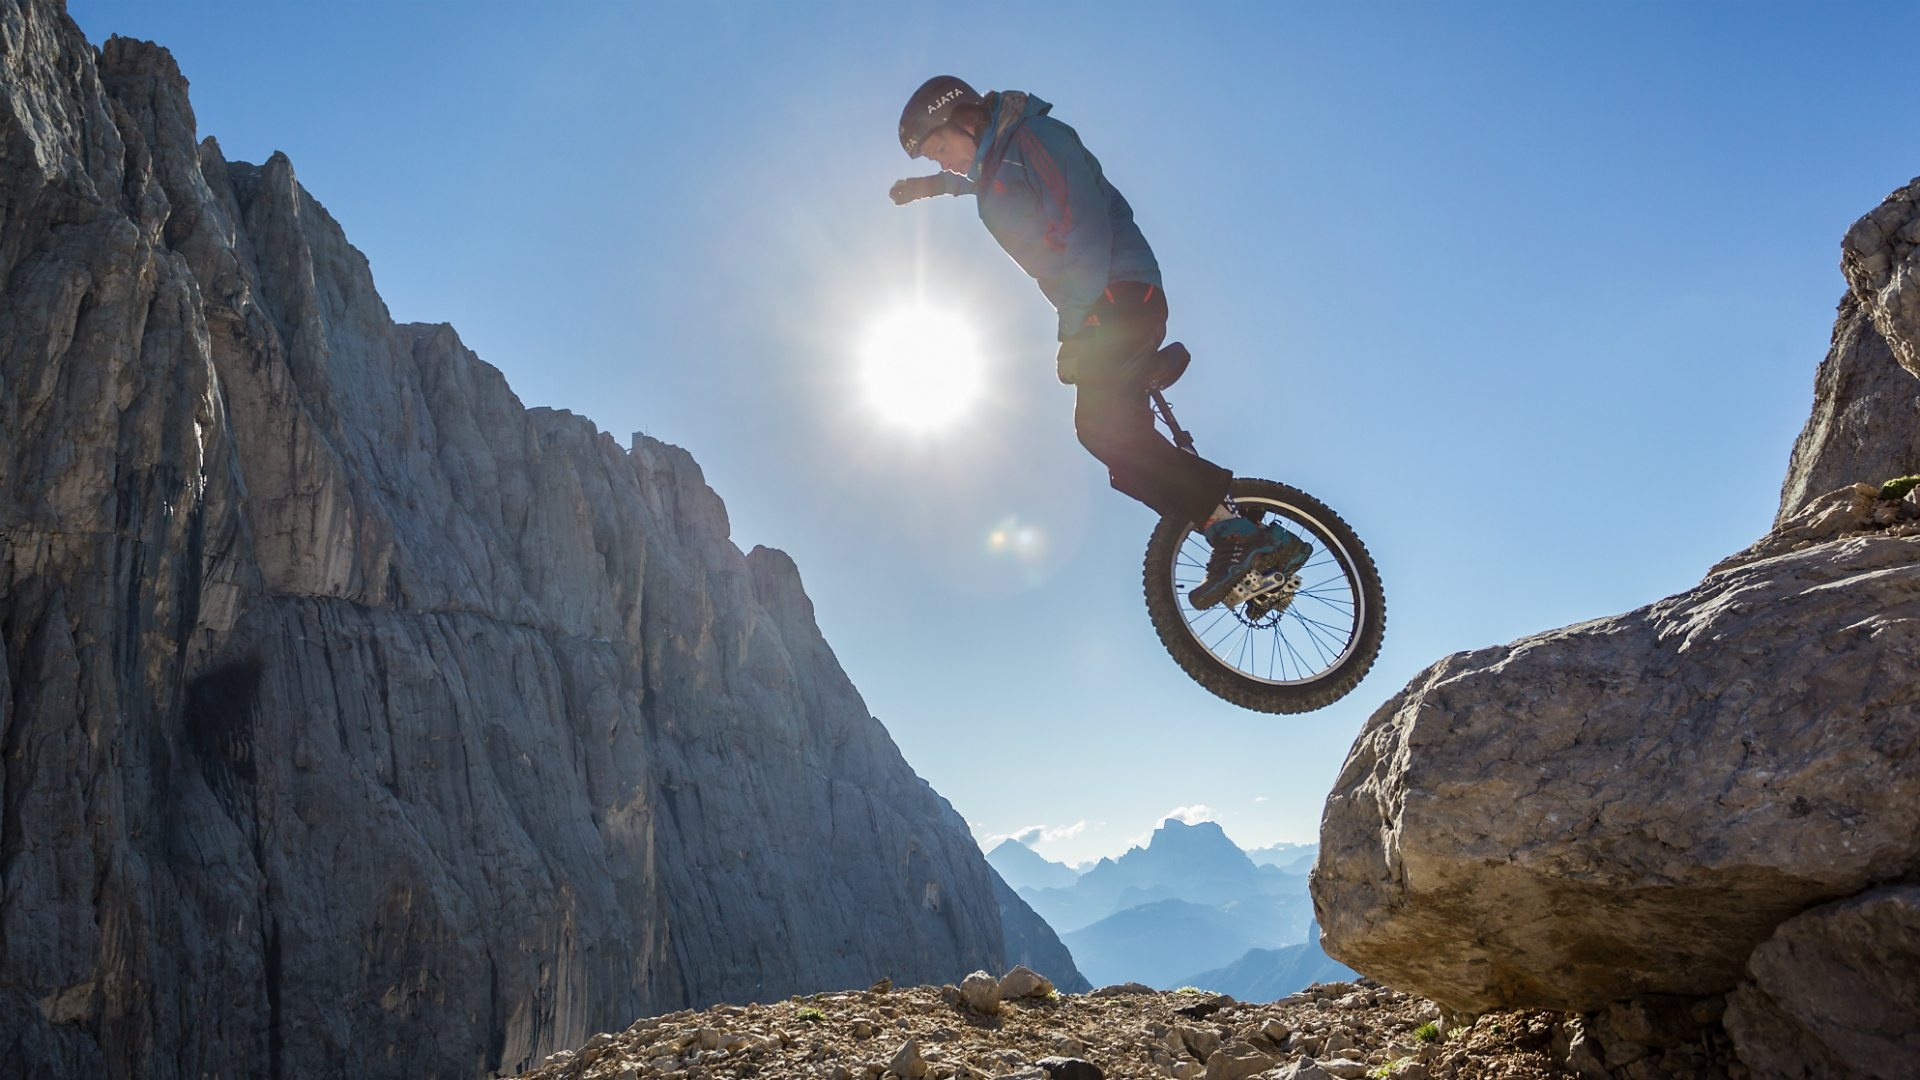 Unicycle: Extreme Mountain Unicycling 2022, North American Unicycling Championships and Convention. 1920x1080 Full HD Wallpaper.